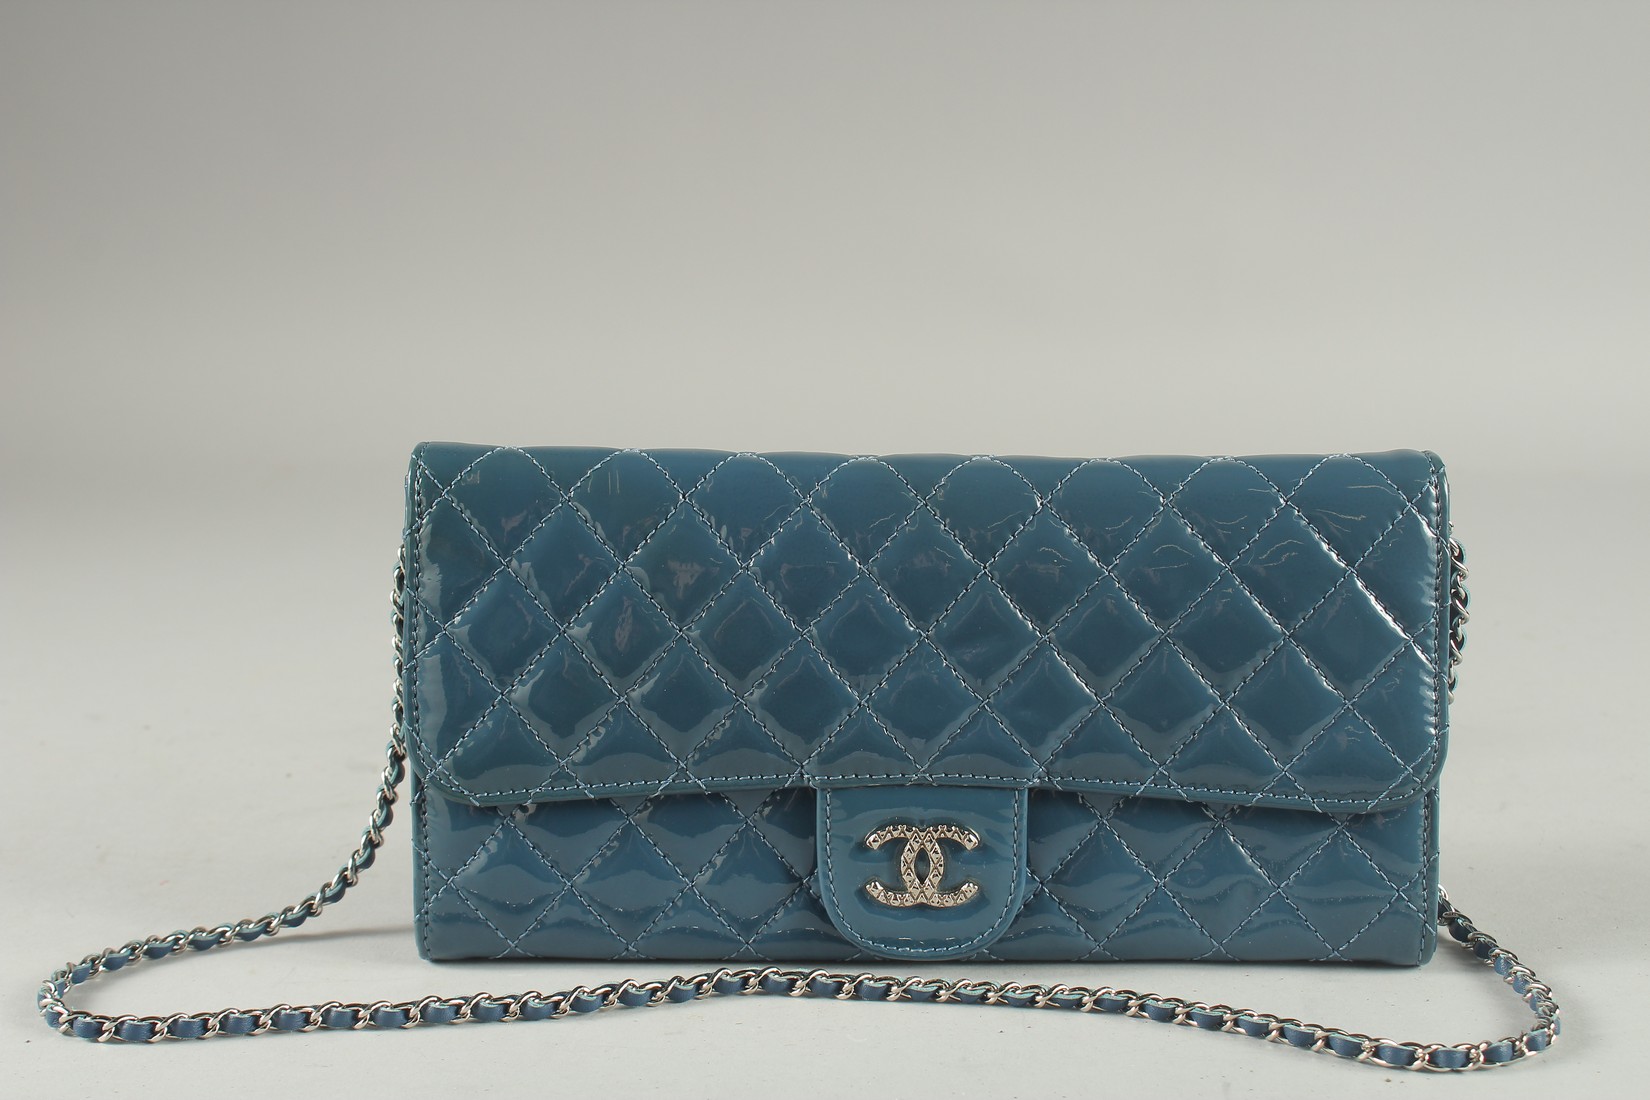 A VERY GOOD CHANEL BLUE PATENT LEATHER HAND BAG with double C medallion. 9.5ins long, 4.75ins deep